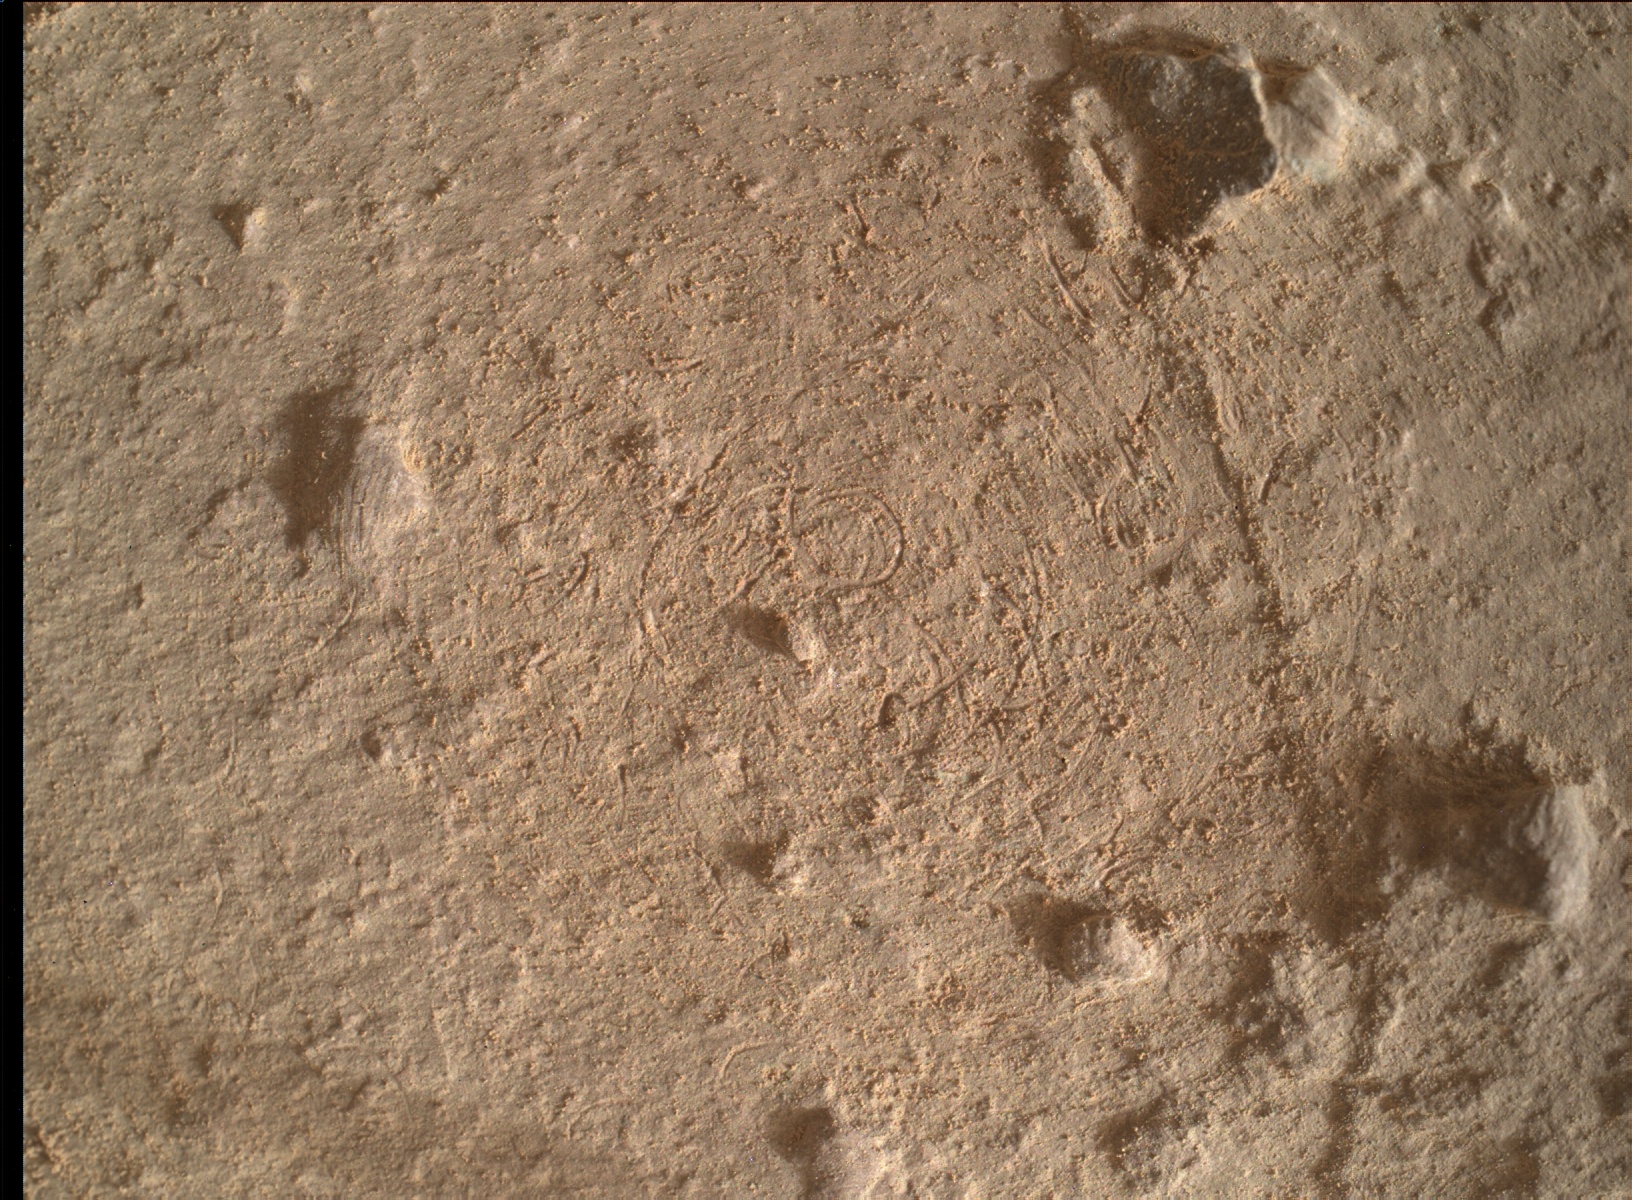 Nasa's Mars rover Curiosity acquired this image using its Mars Hand Lens Imager (MAHLI) on Sol 1457